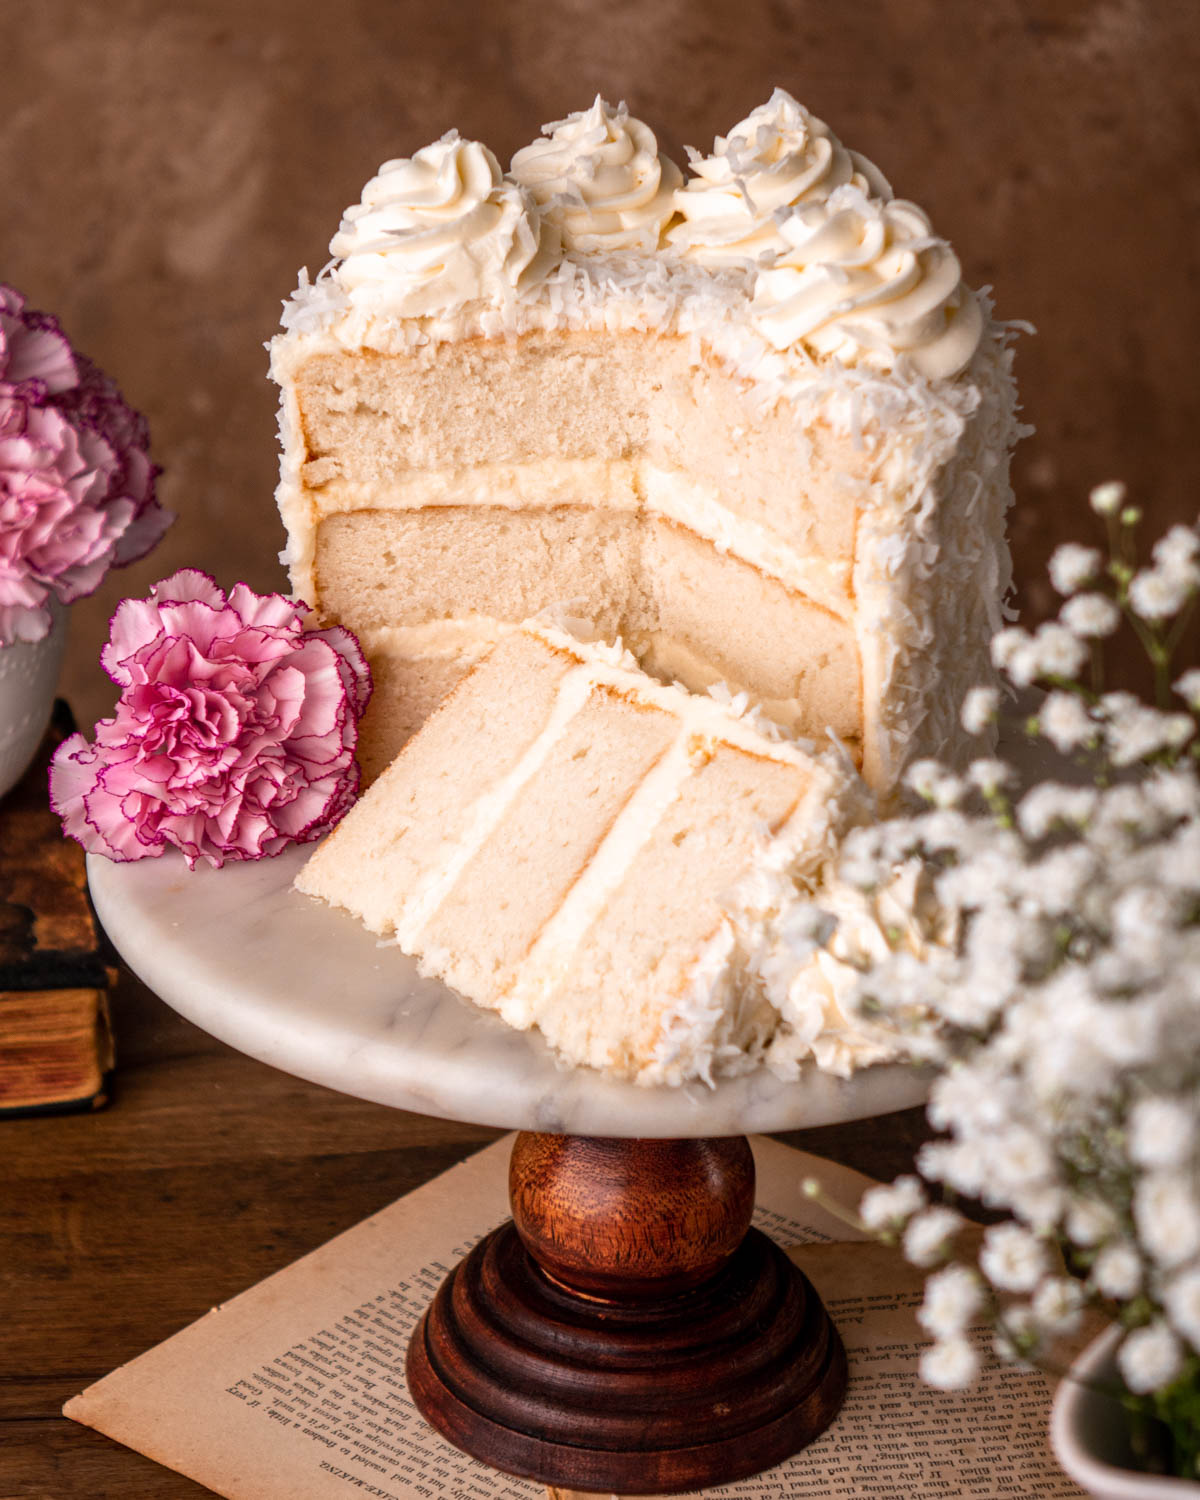 coconut cake cut open, with cake slice in front, on a marble cake stand with pink and white flowers